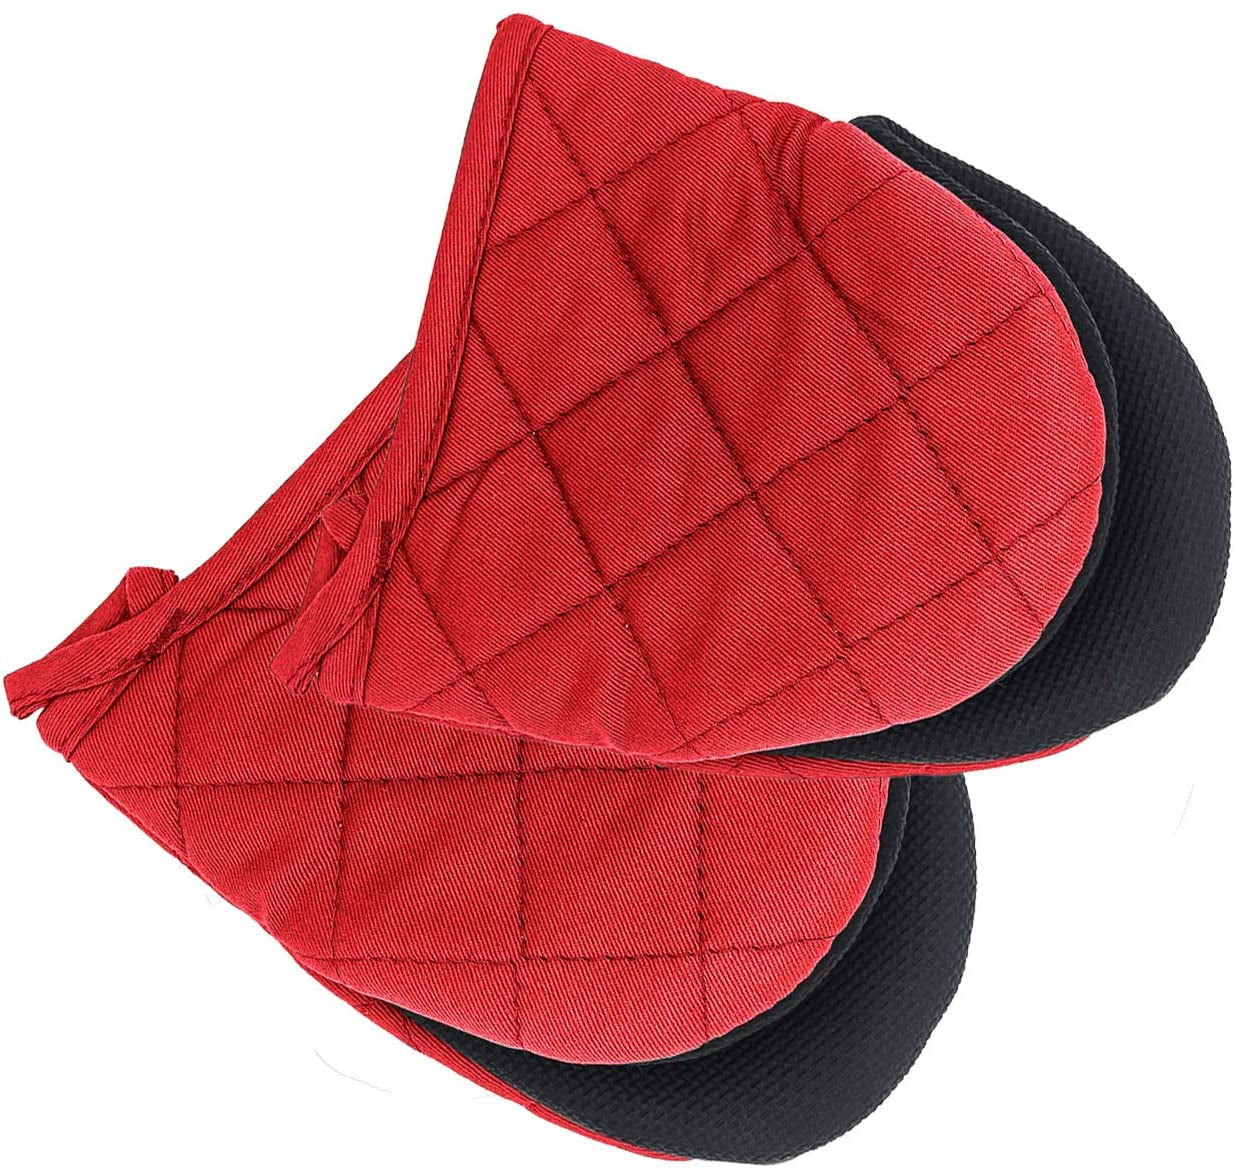 Neoprene Red Mini Oven Mitts. 2 Pack Short Small Cotton Half Finger Hand  Mits with Hang Lanyard. Heat Resistant Hot Pad Gloves for Kitchen 